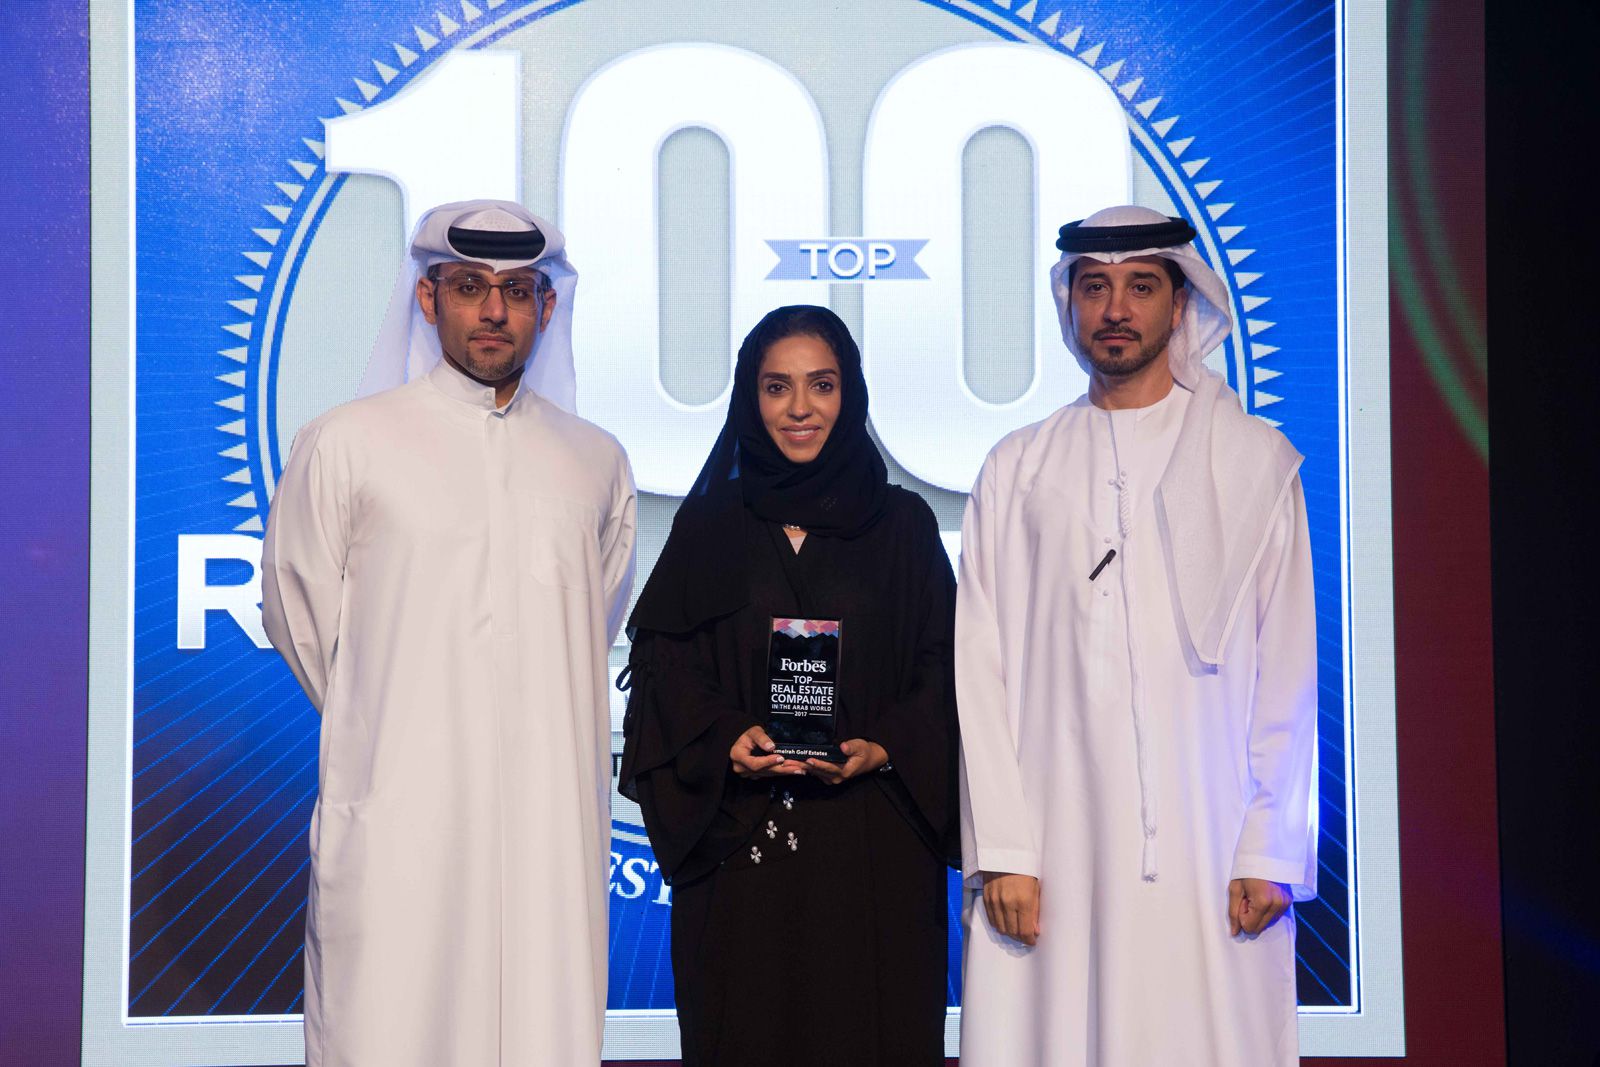 JUMEIRAH GOLF ESTATES NAMED A TOP REAL ESTATE COMPANY IN THE ARAB WORLD FOR THE SECOND CONSECUTIVE YEAR